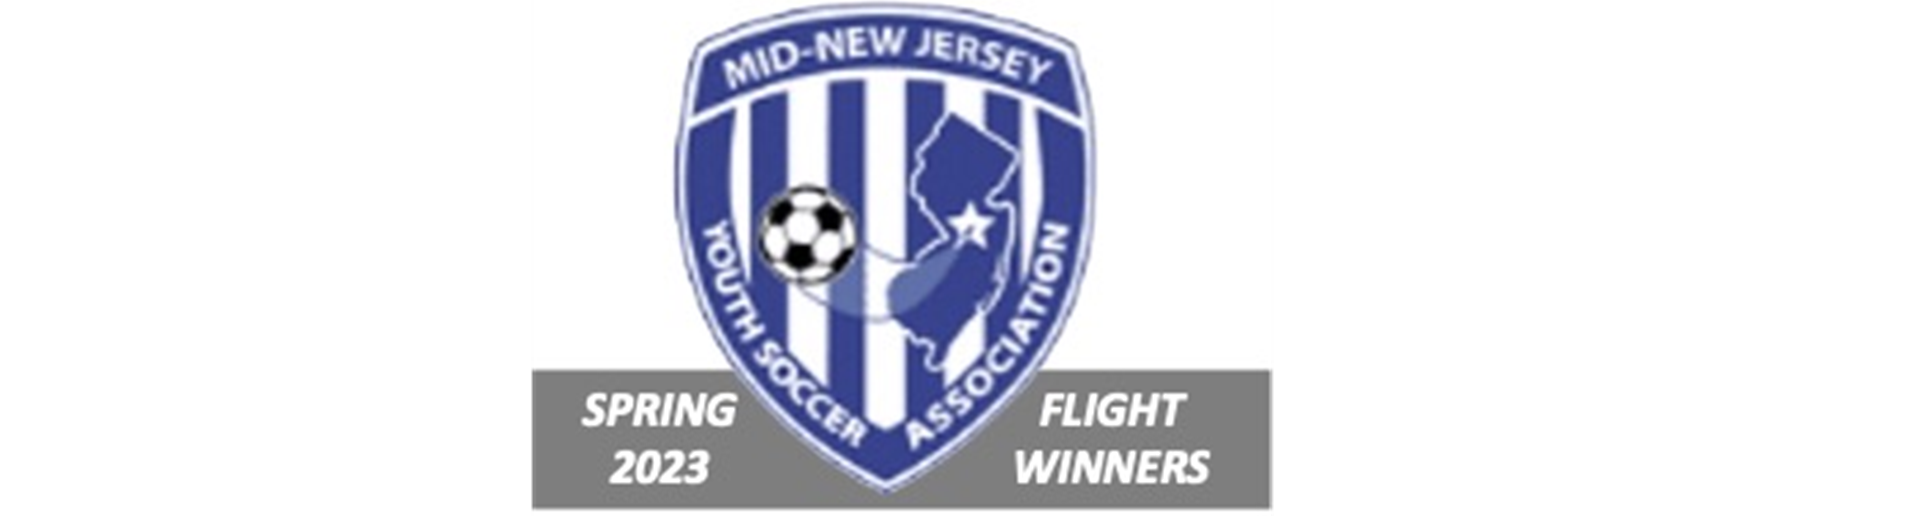 Congratulations to our Mid-NJ Flight Winners